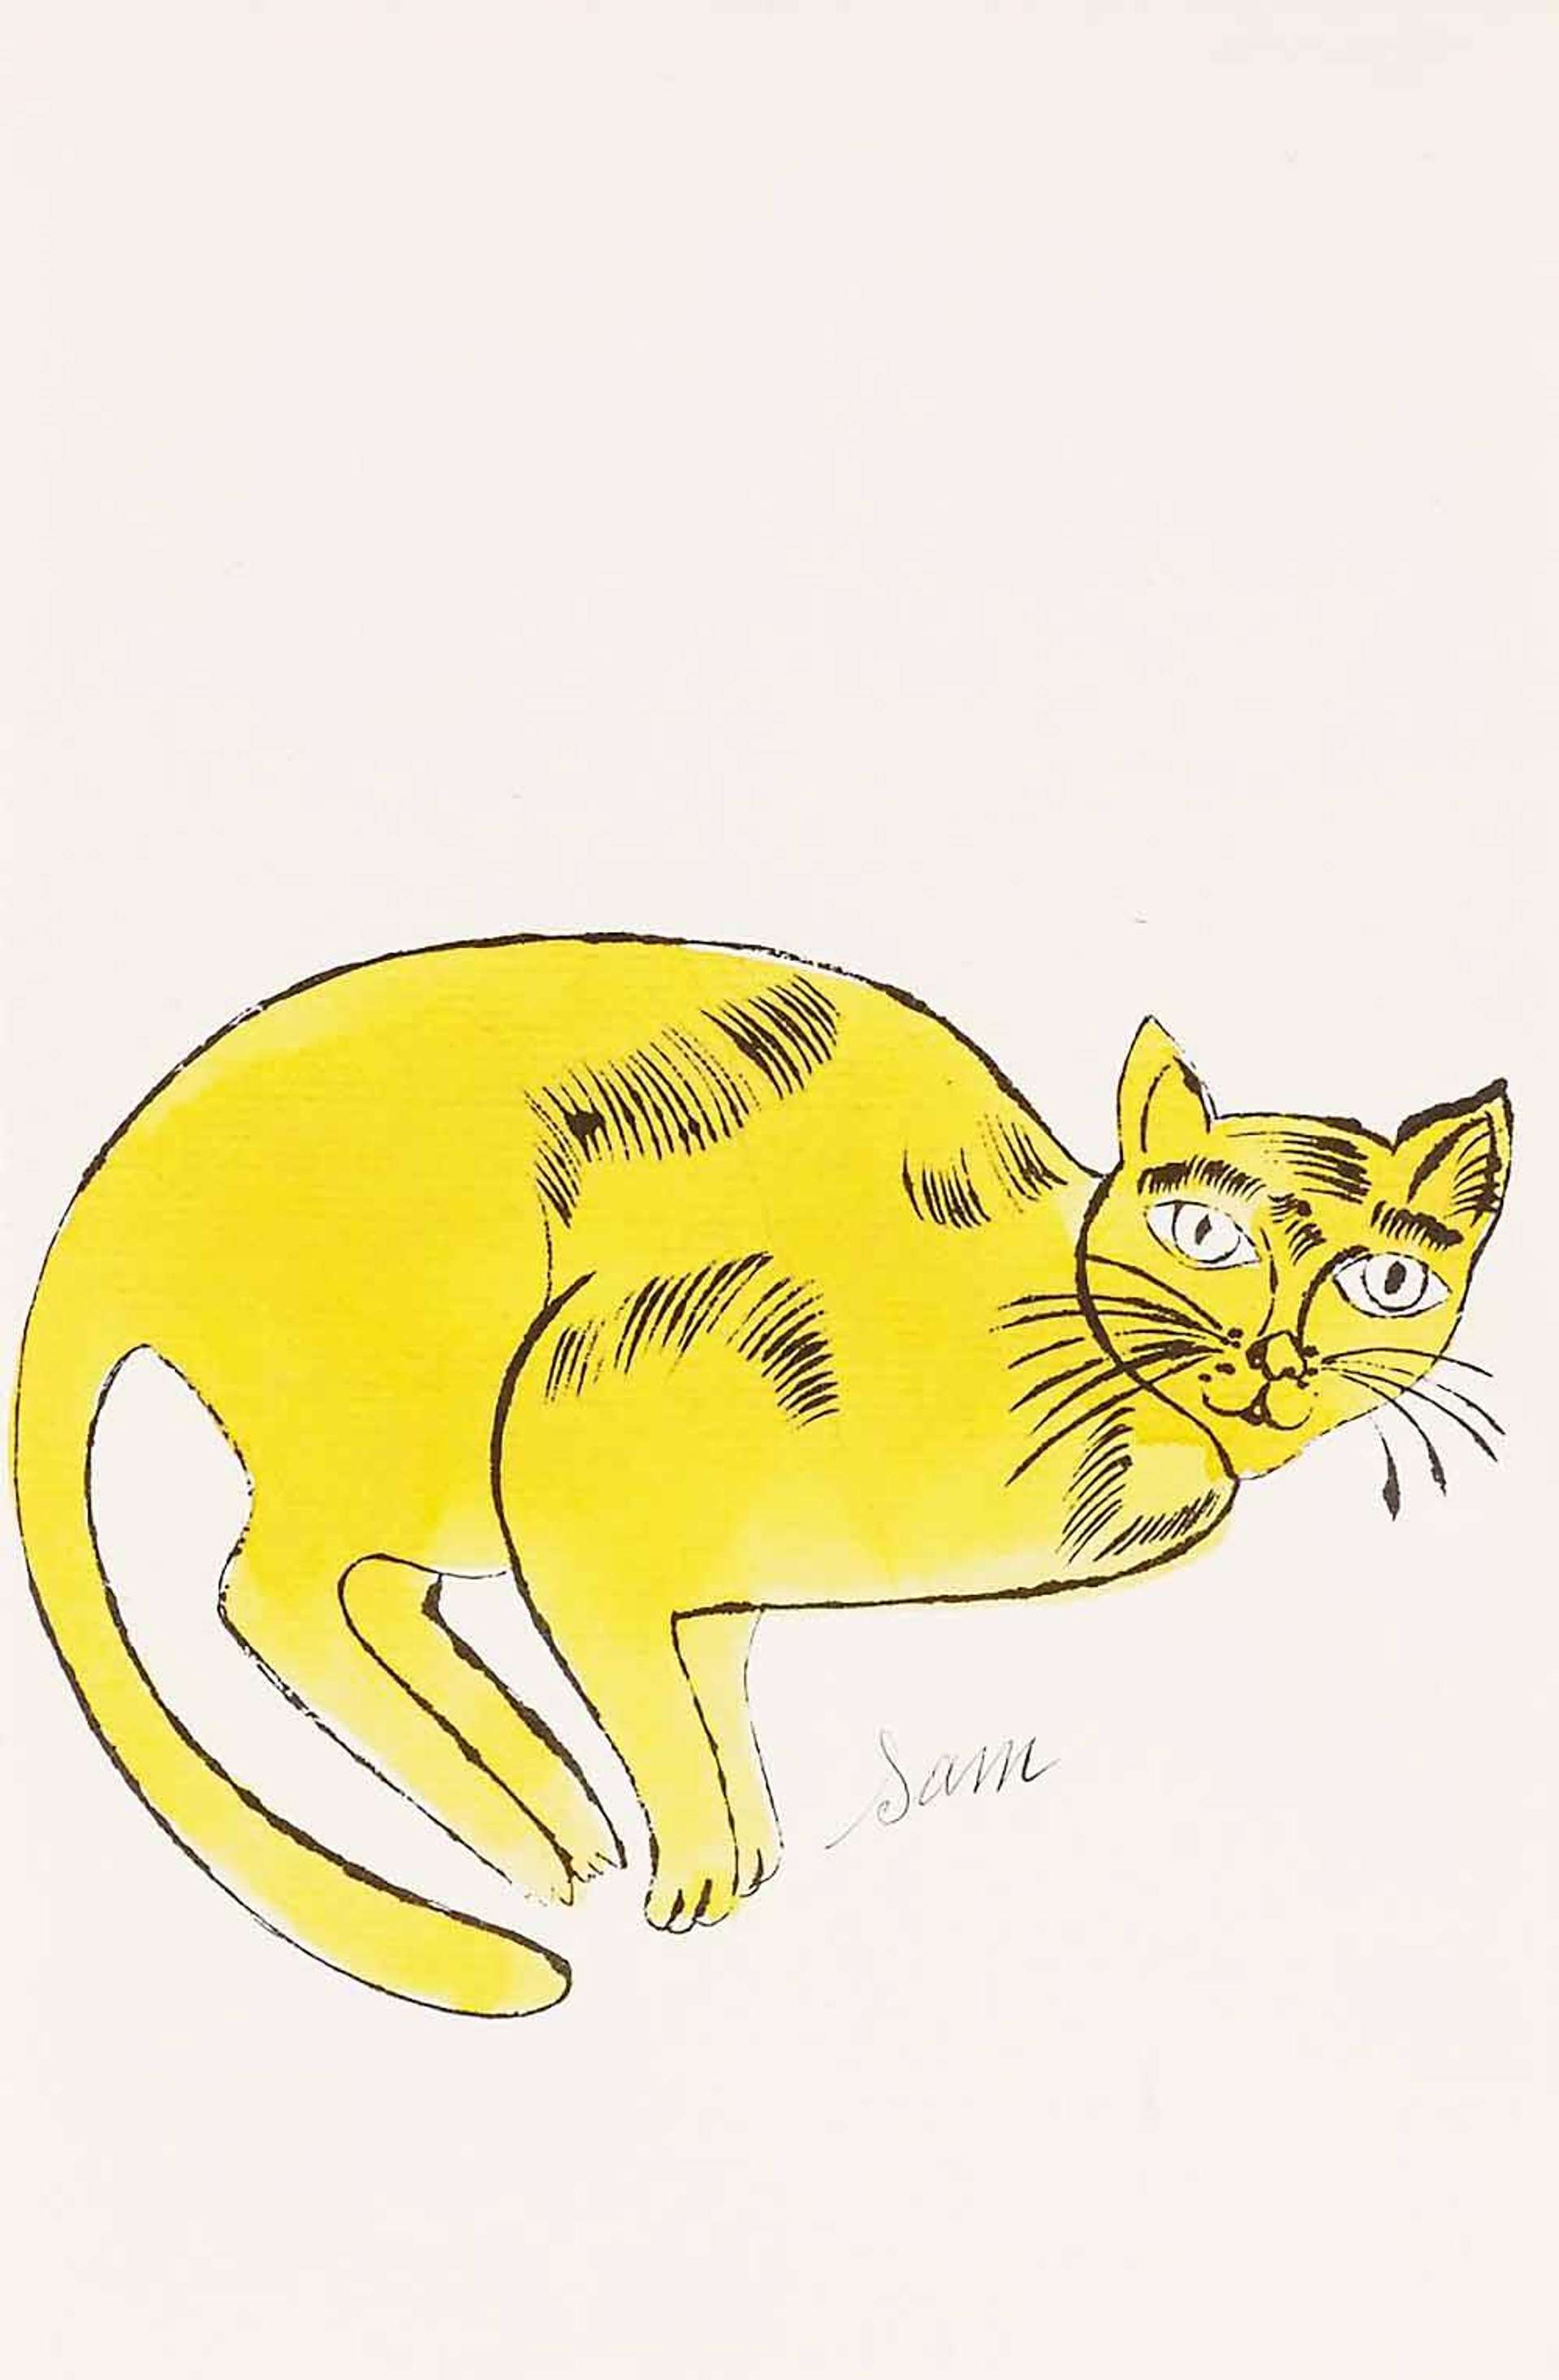 Cats Named Sam IV 67 by Andy Warhol